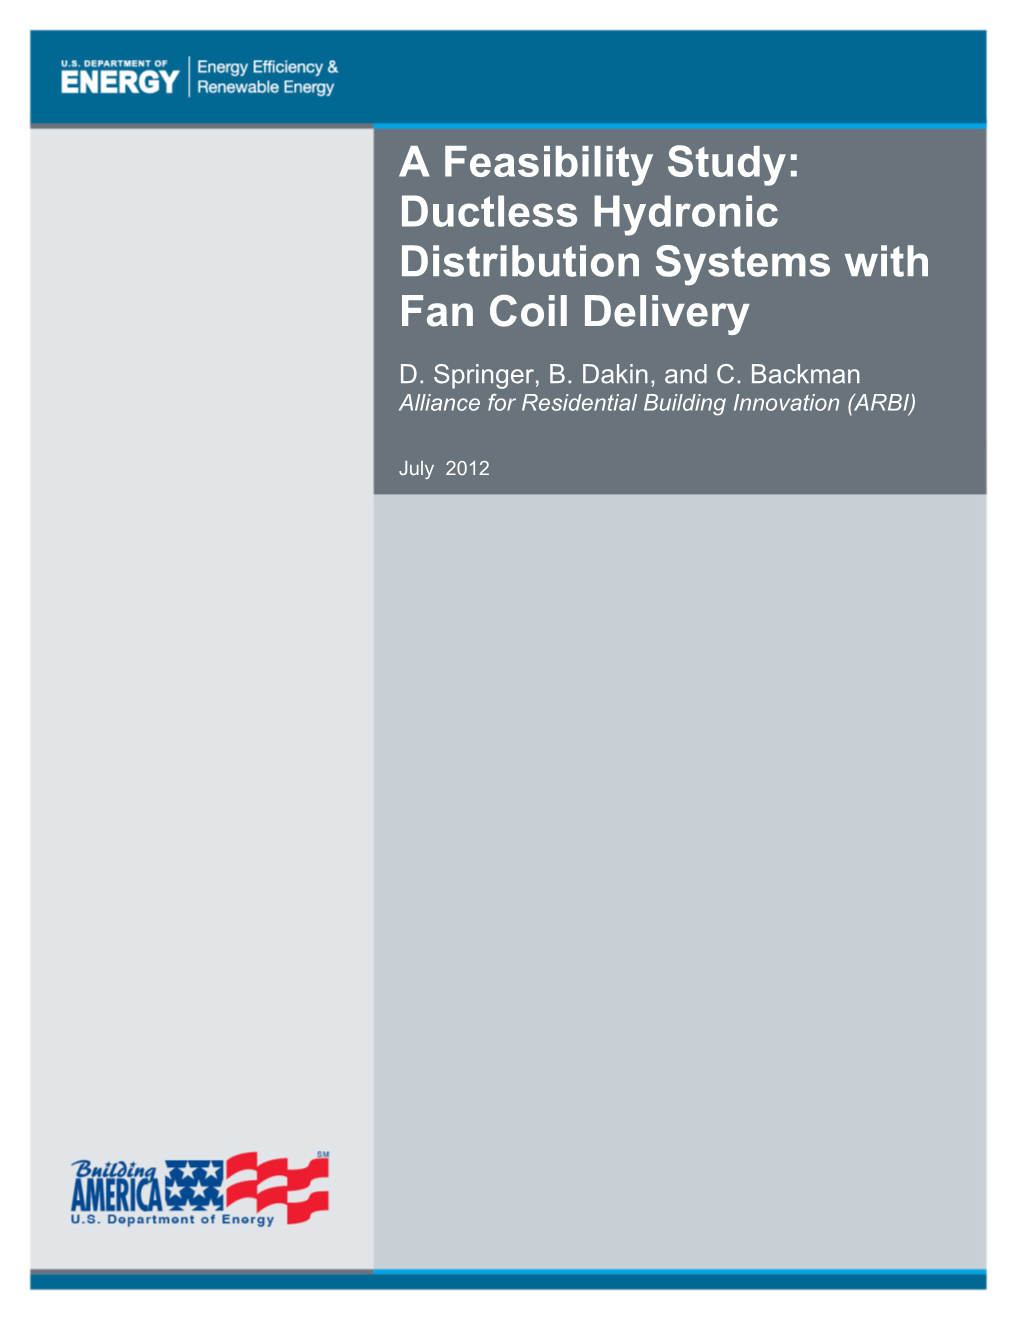 Feasibility Study: Ductless Hydronic Distribution Systems with Fan Coil Delivery